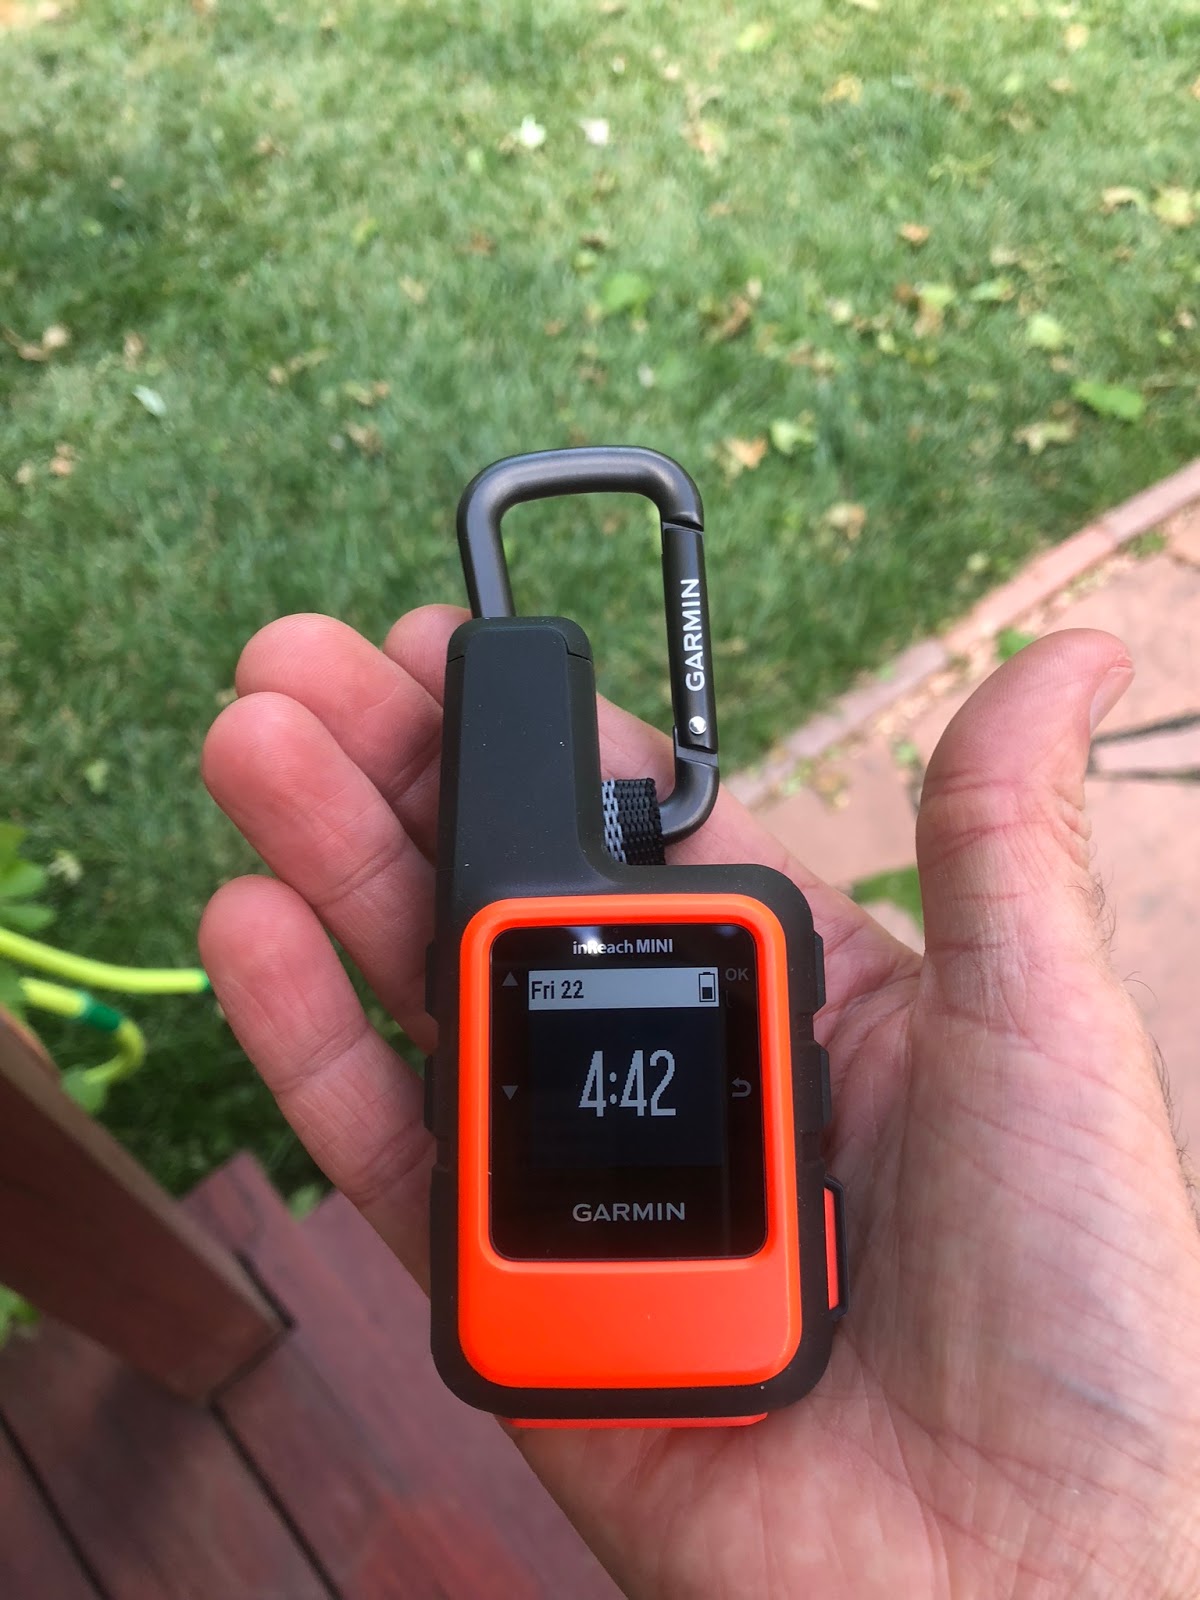 Road Trail Run: Garmin inReach Mini Review - Finally!! A Lightweight Two-Way Satellite Communicator For Runners, Travelers Off the Beaten Path and Gram